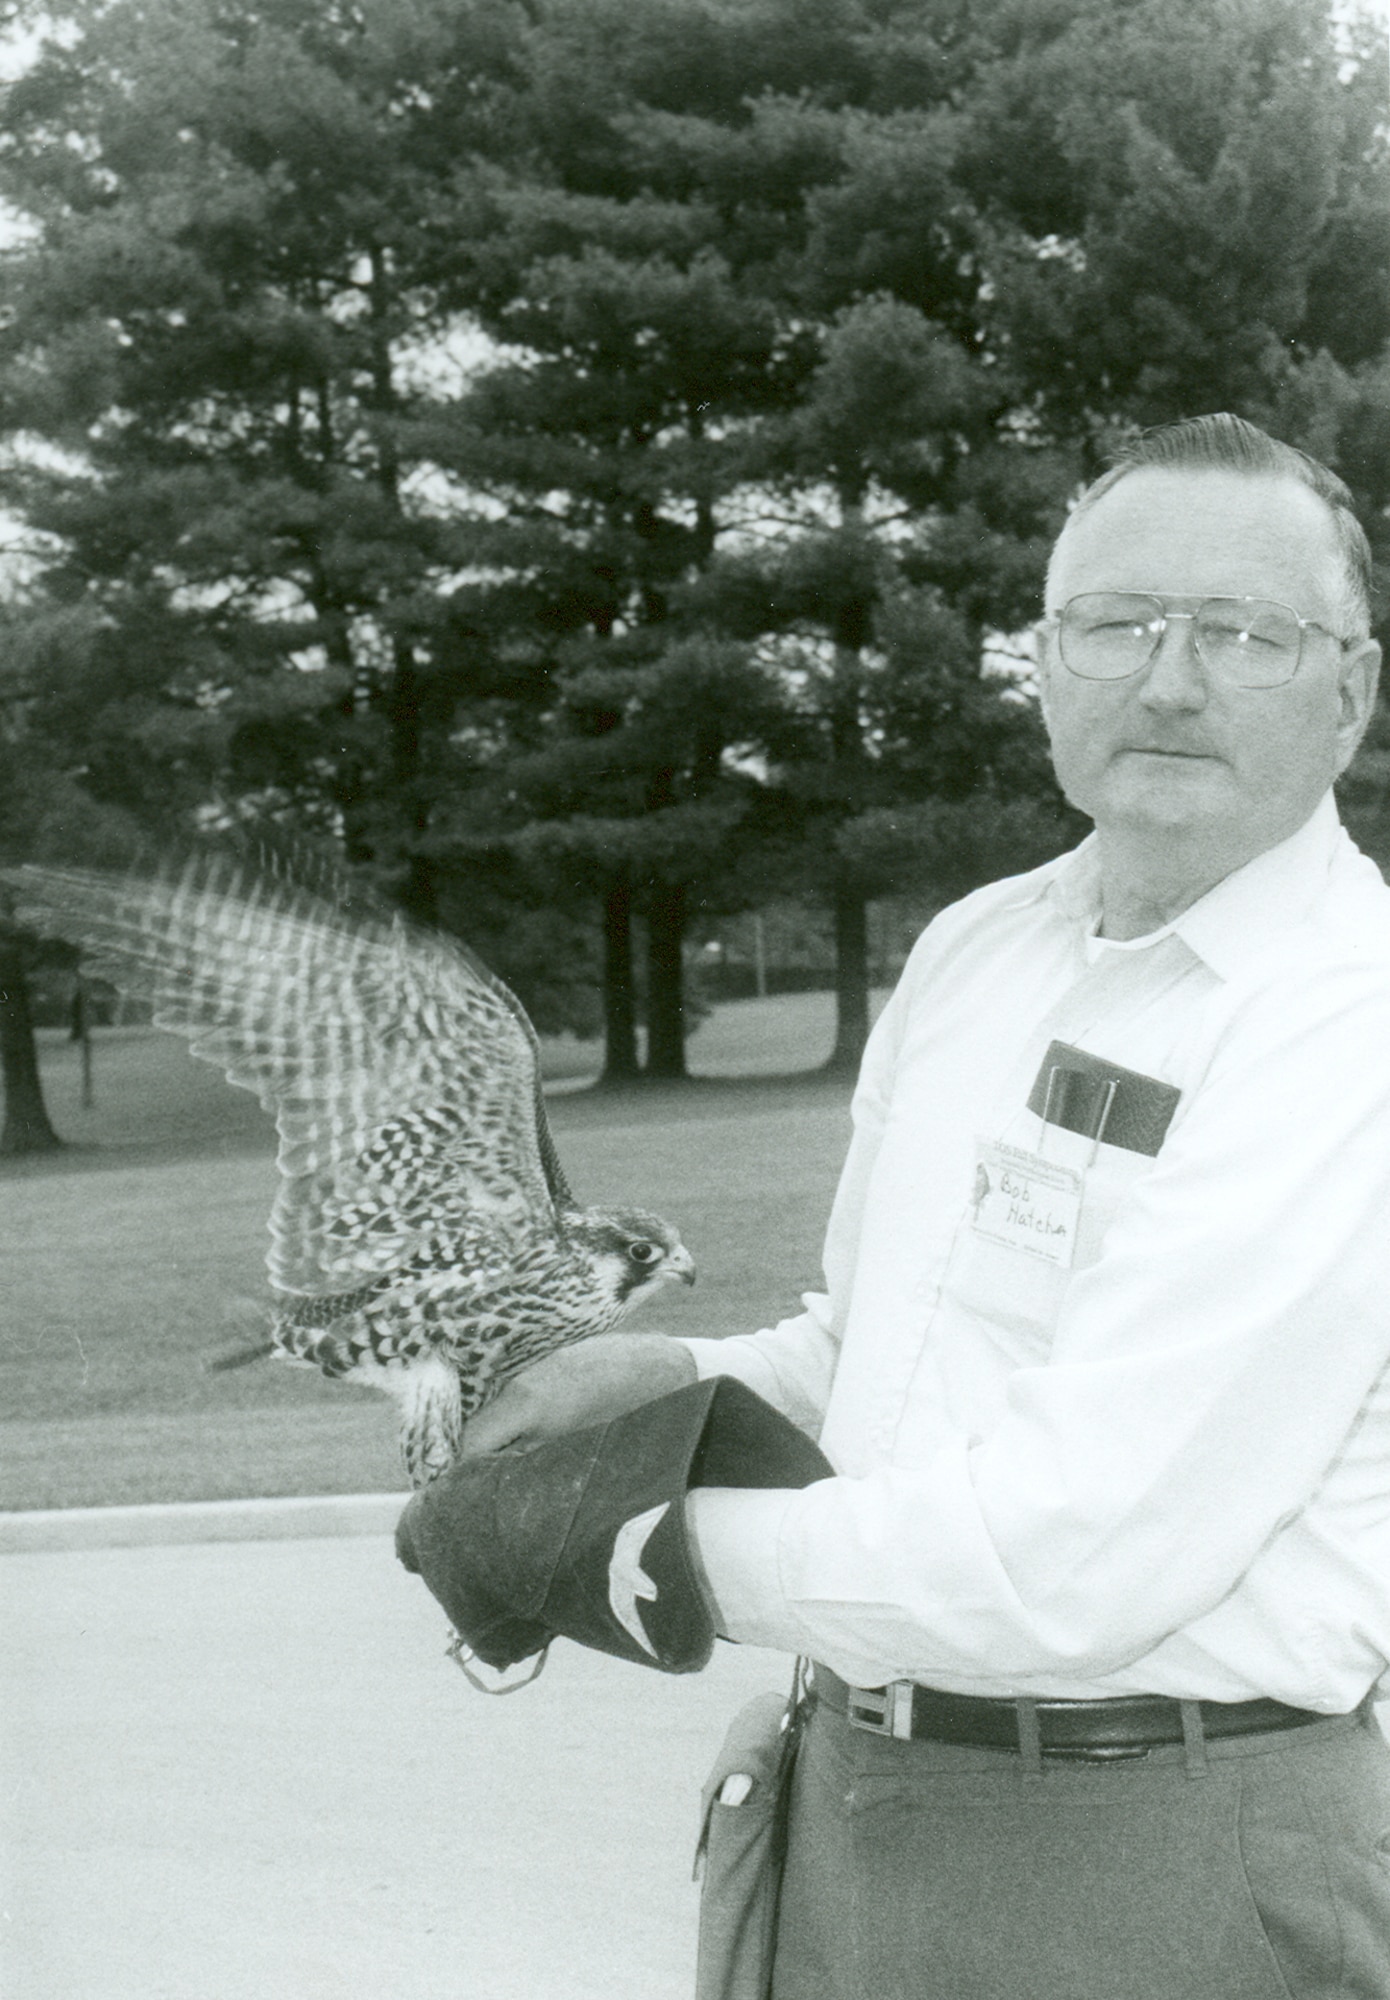 Bob Hatcher, secretary of the Tennessee Ornithological Society, prepares to release a peregrine falcon back into the wild during a symposium held at Arnold Air Force Base in fall 1992. This image and an accompanying article were featured in the Nov. 18, 1992, issue of High Mach. (U.S. Air Force photo)